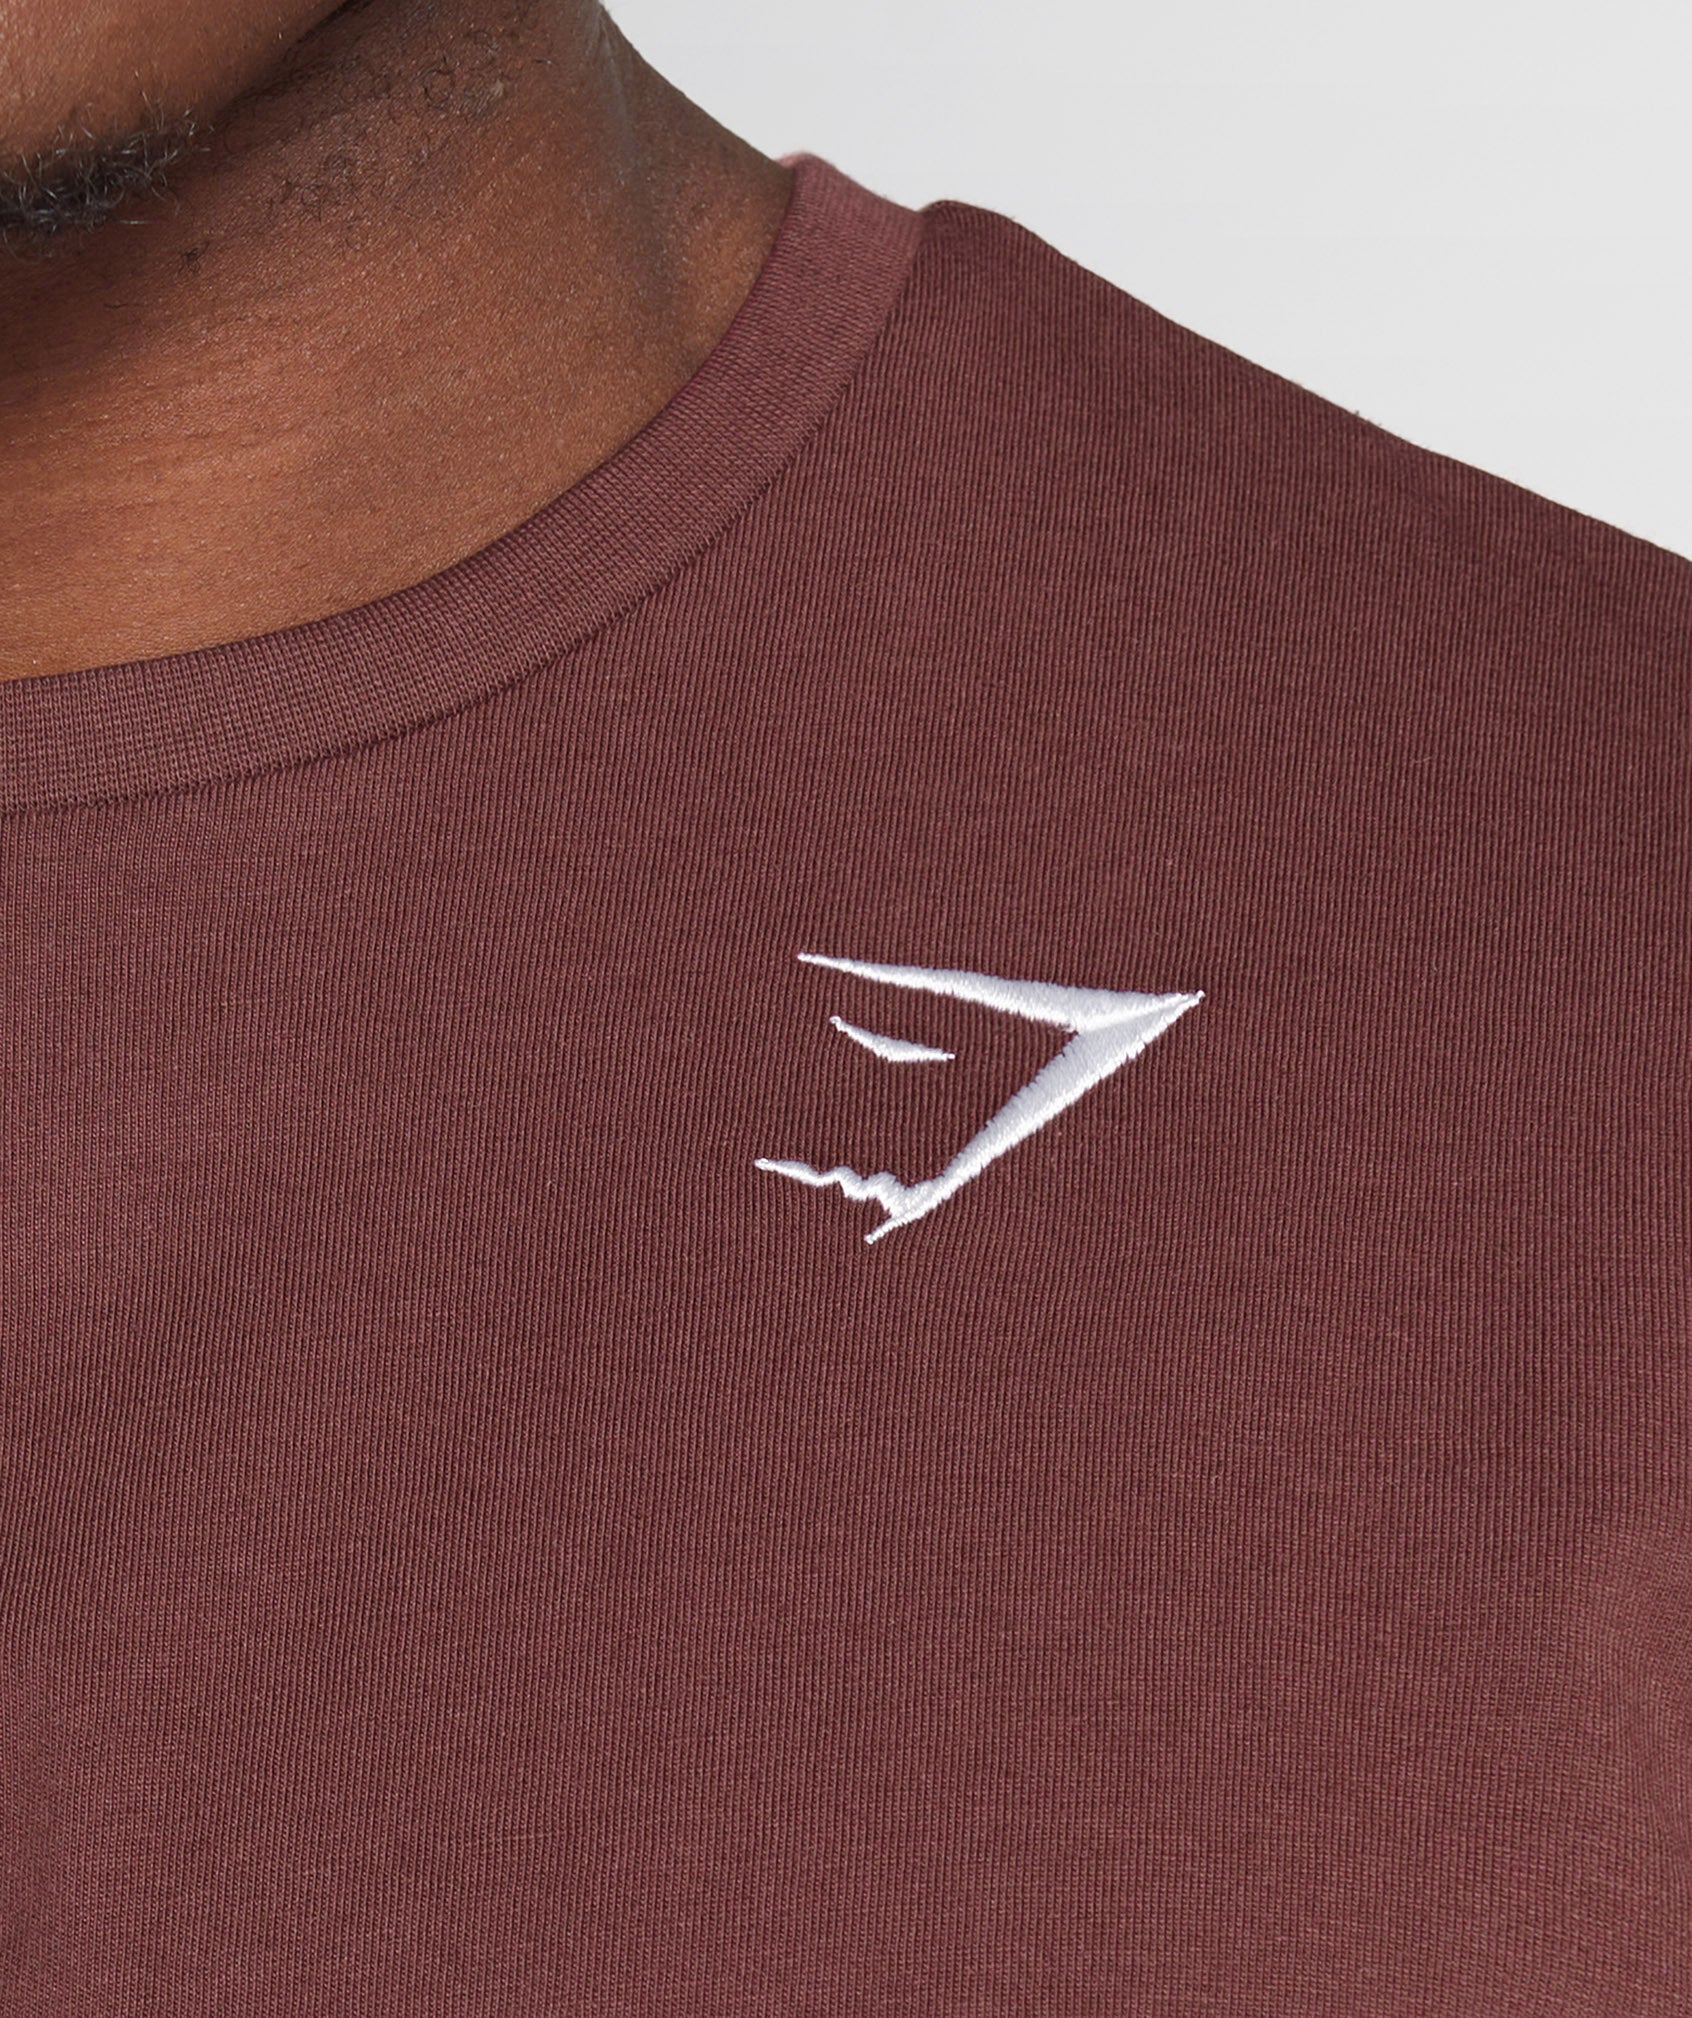 Crest T-Shirt in Cherry Brown - view 3